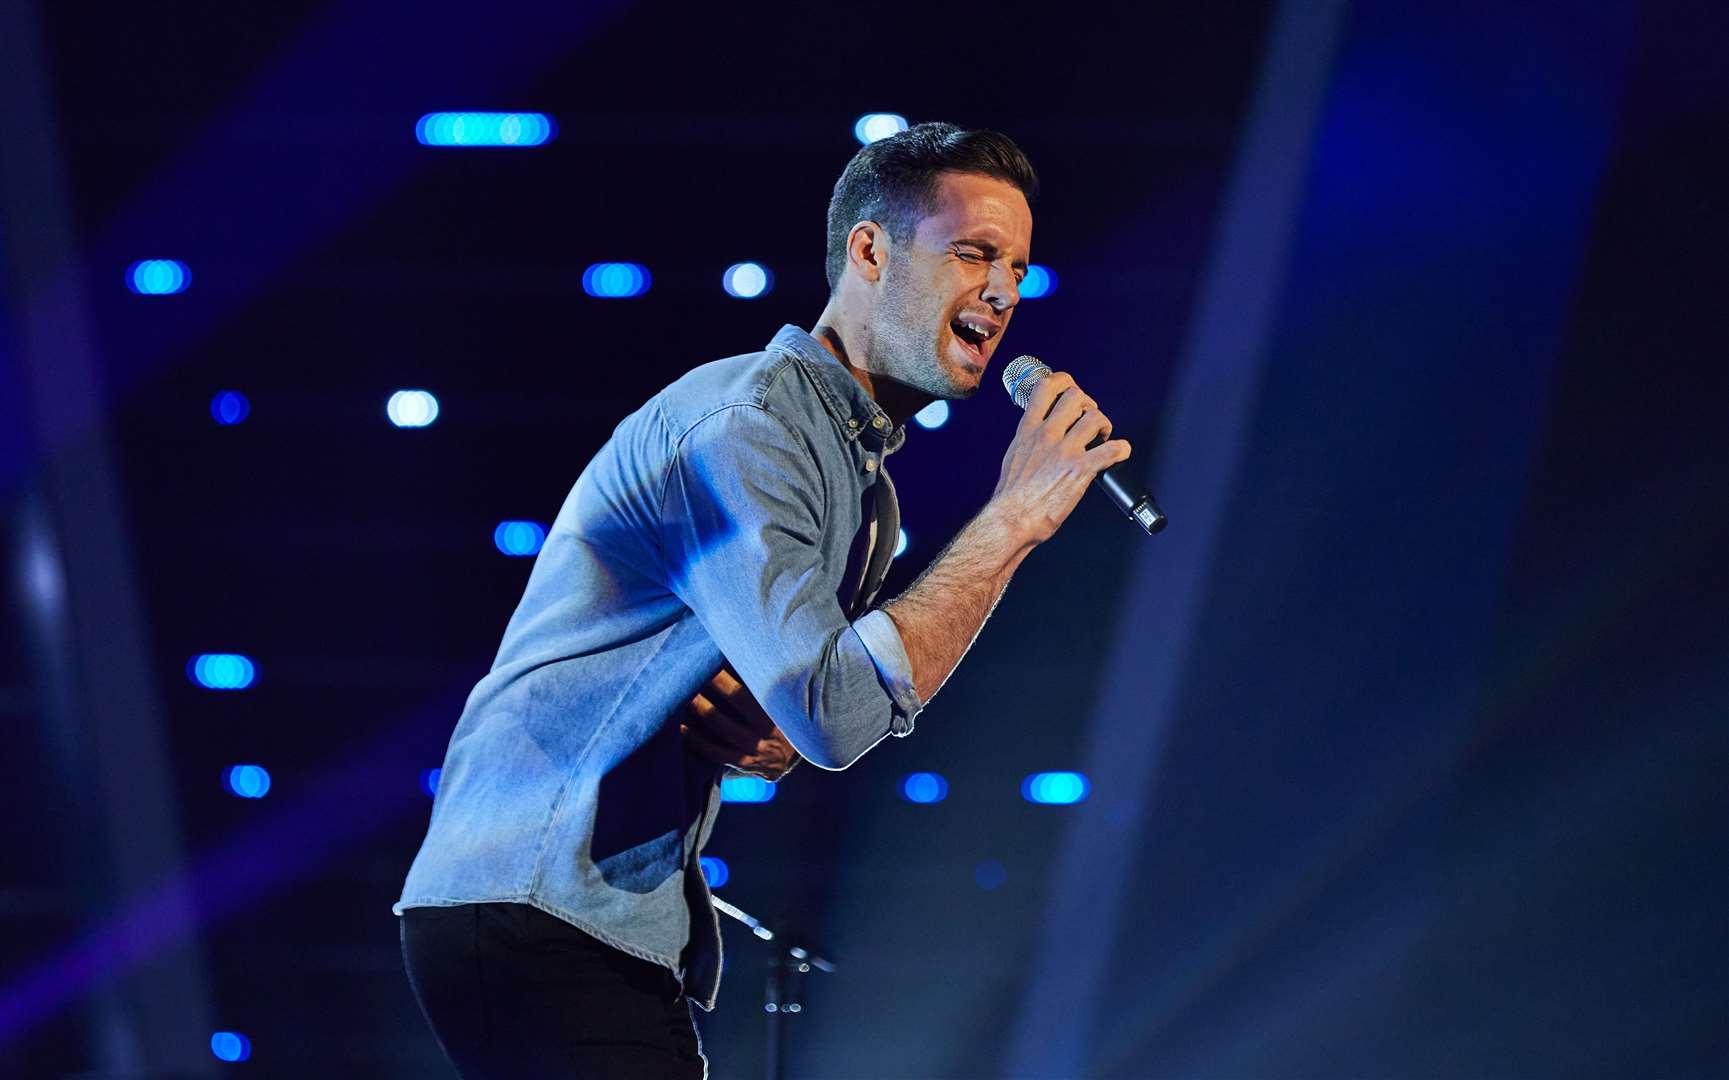 Tunbridge Wells man Andrew Bateup to appear on The Voice tonight